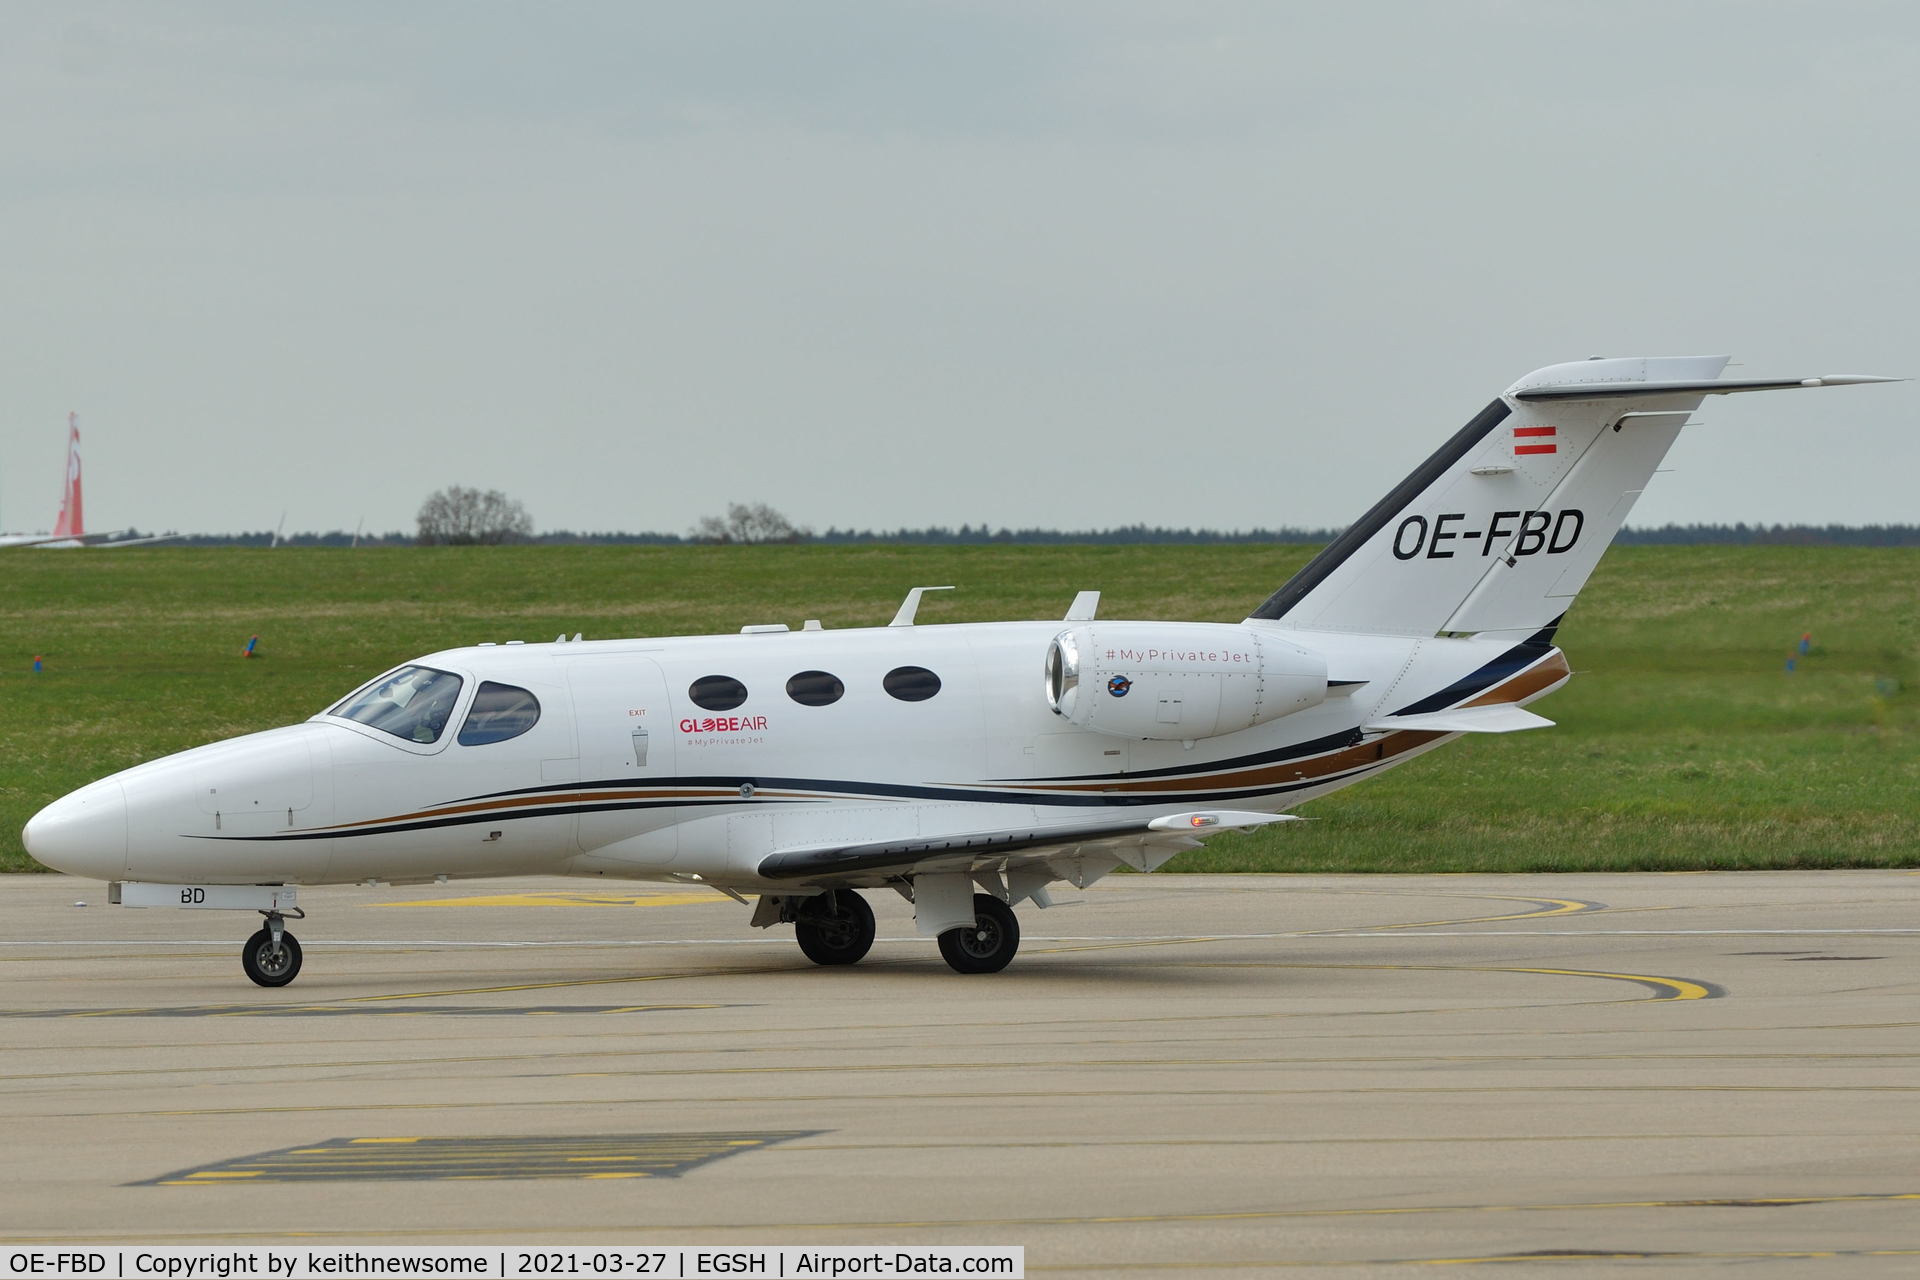 OE-FBD, 2010 Cessna 510 Citation Mustang Citation Mustang C/N 510-0303, Arriving at Norwich from Paderborn, Germany.